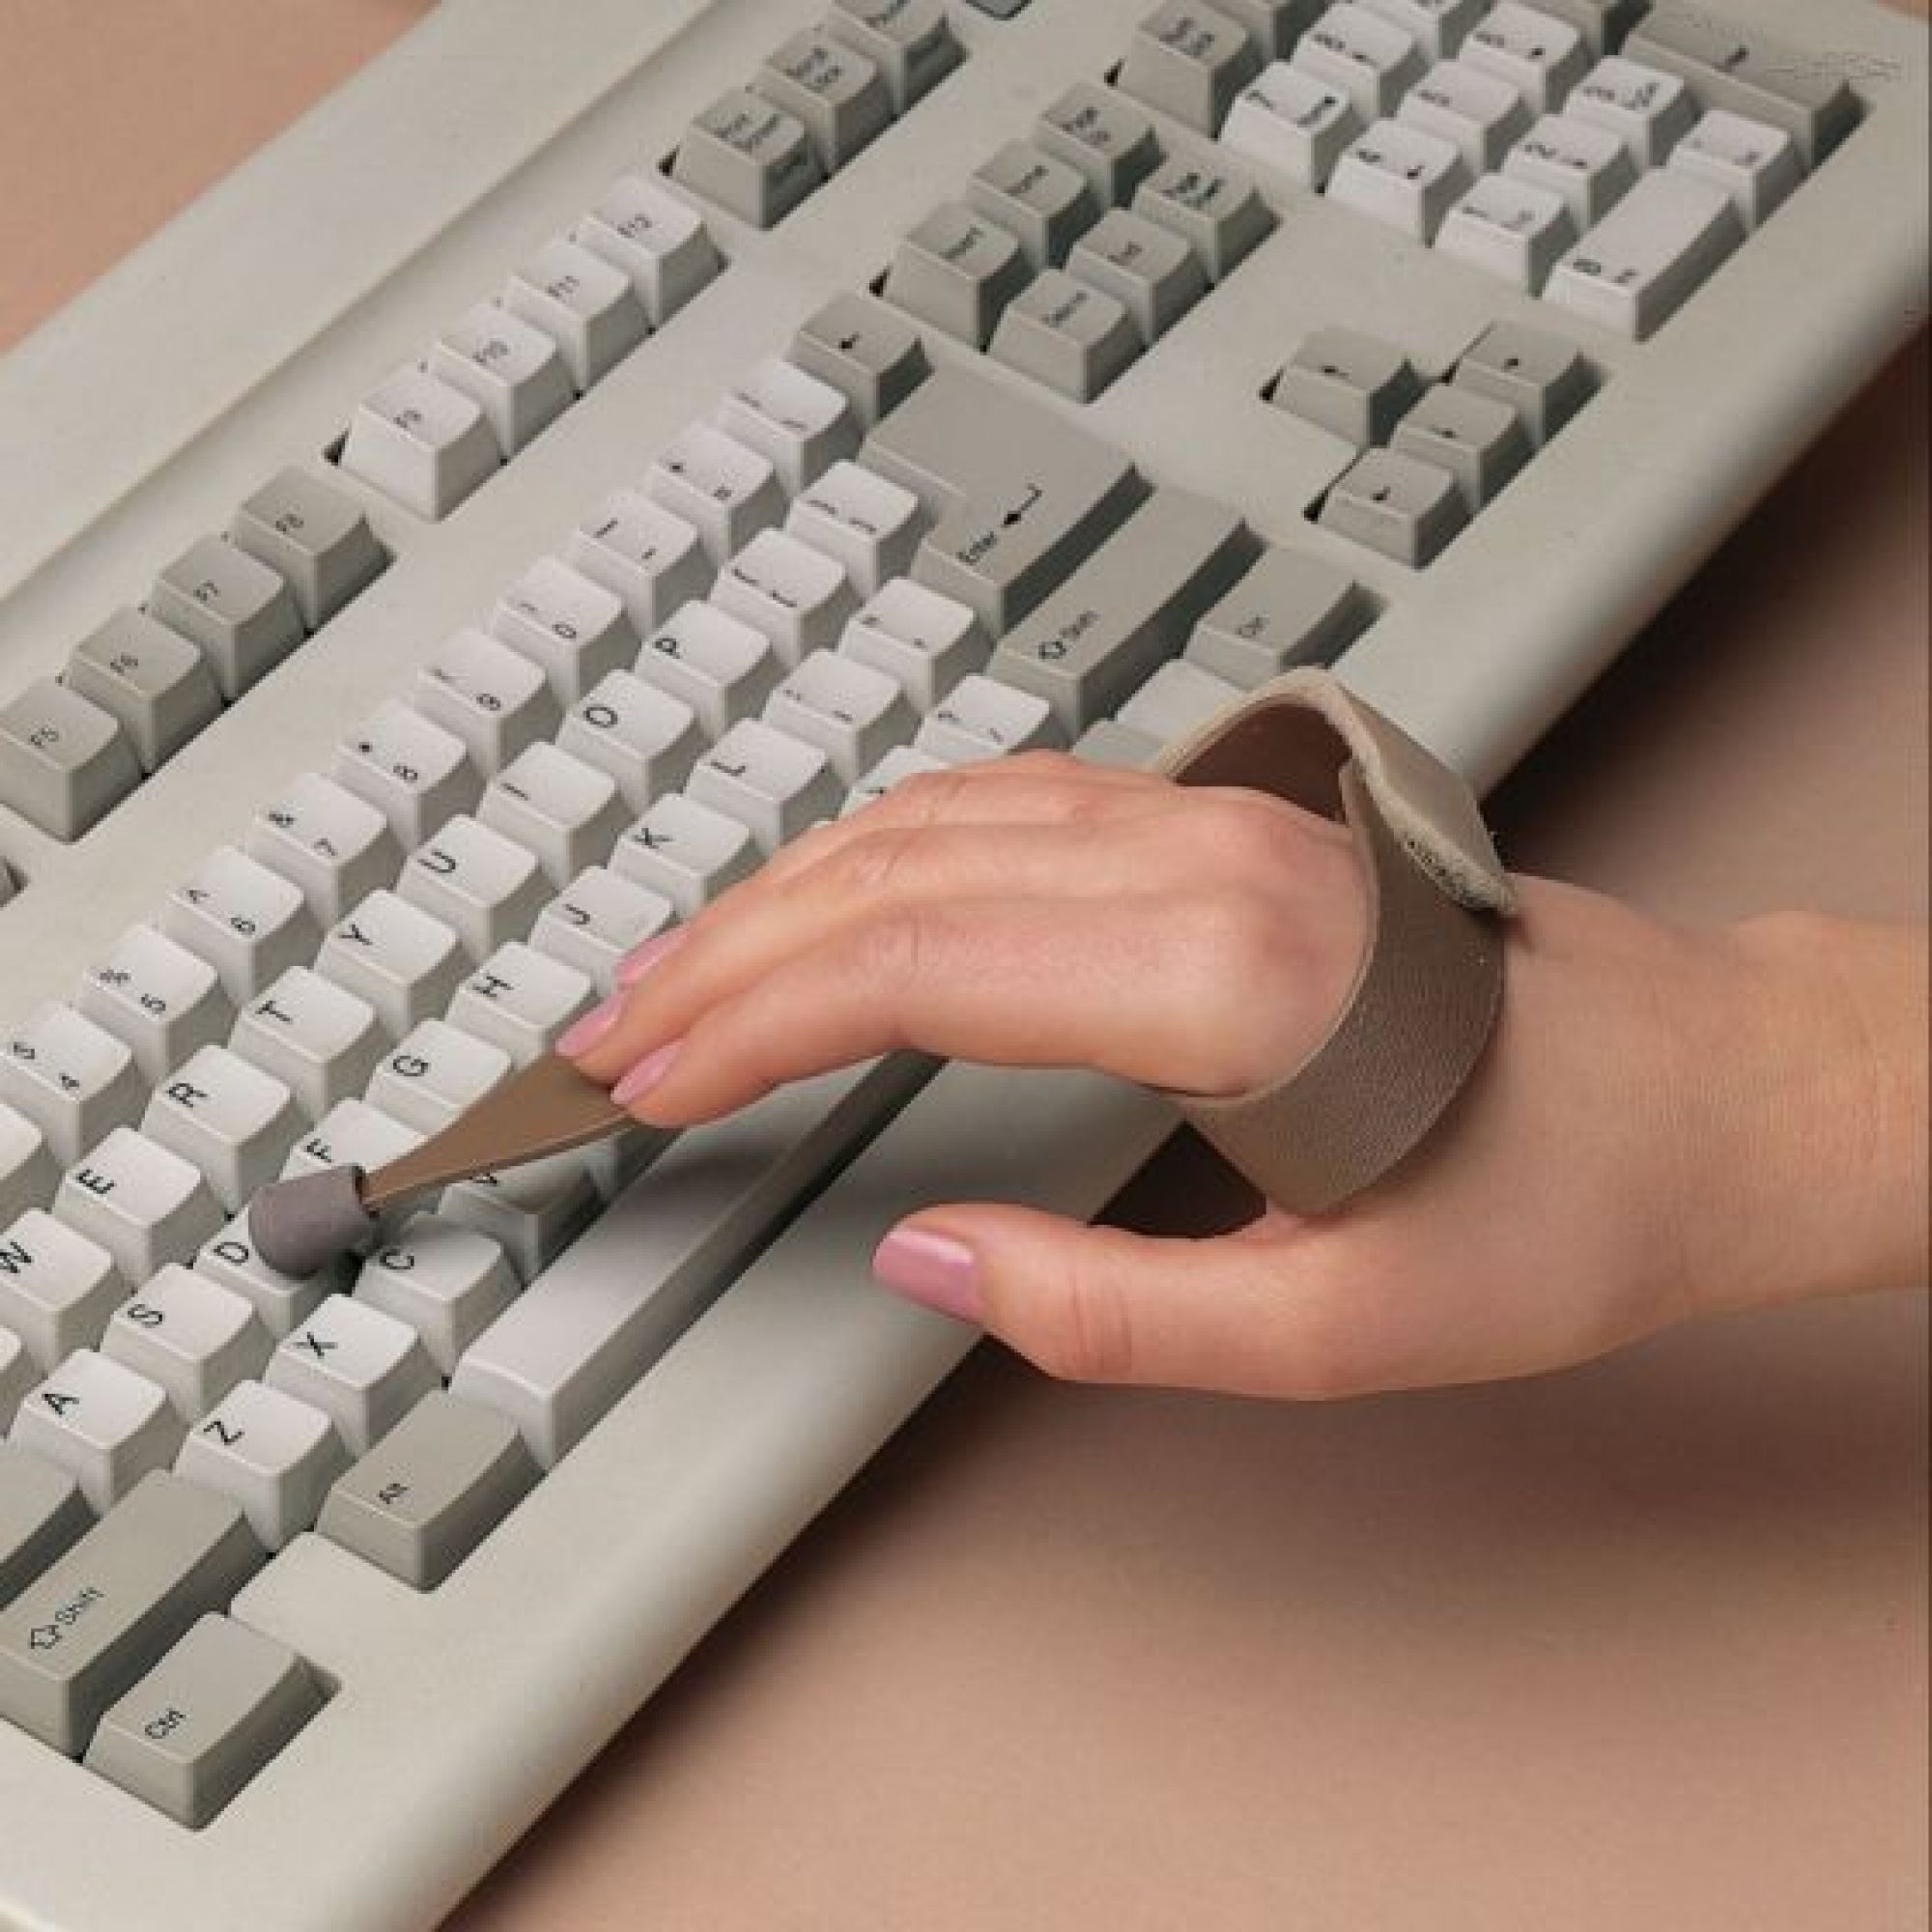 Slip-On Typing/Keyboard Aid BUY NOW - FREE Shipping